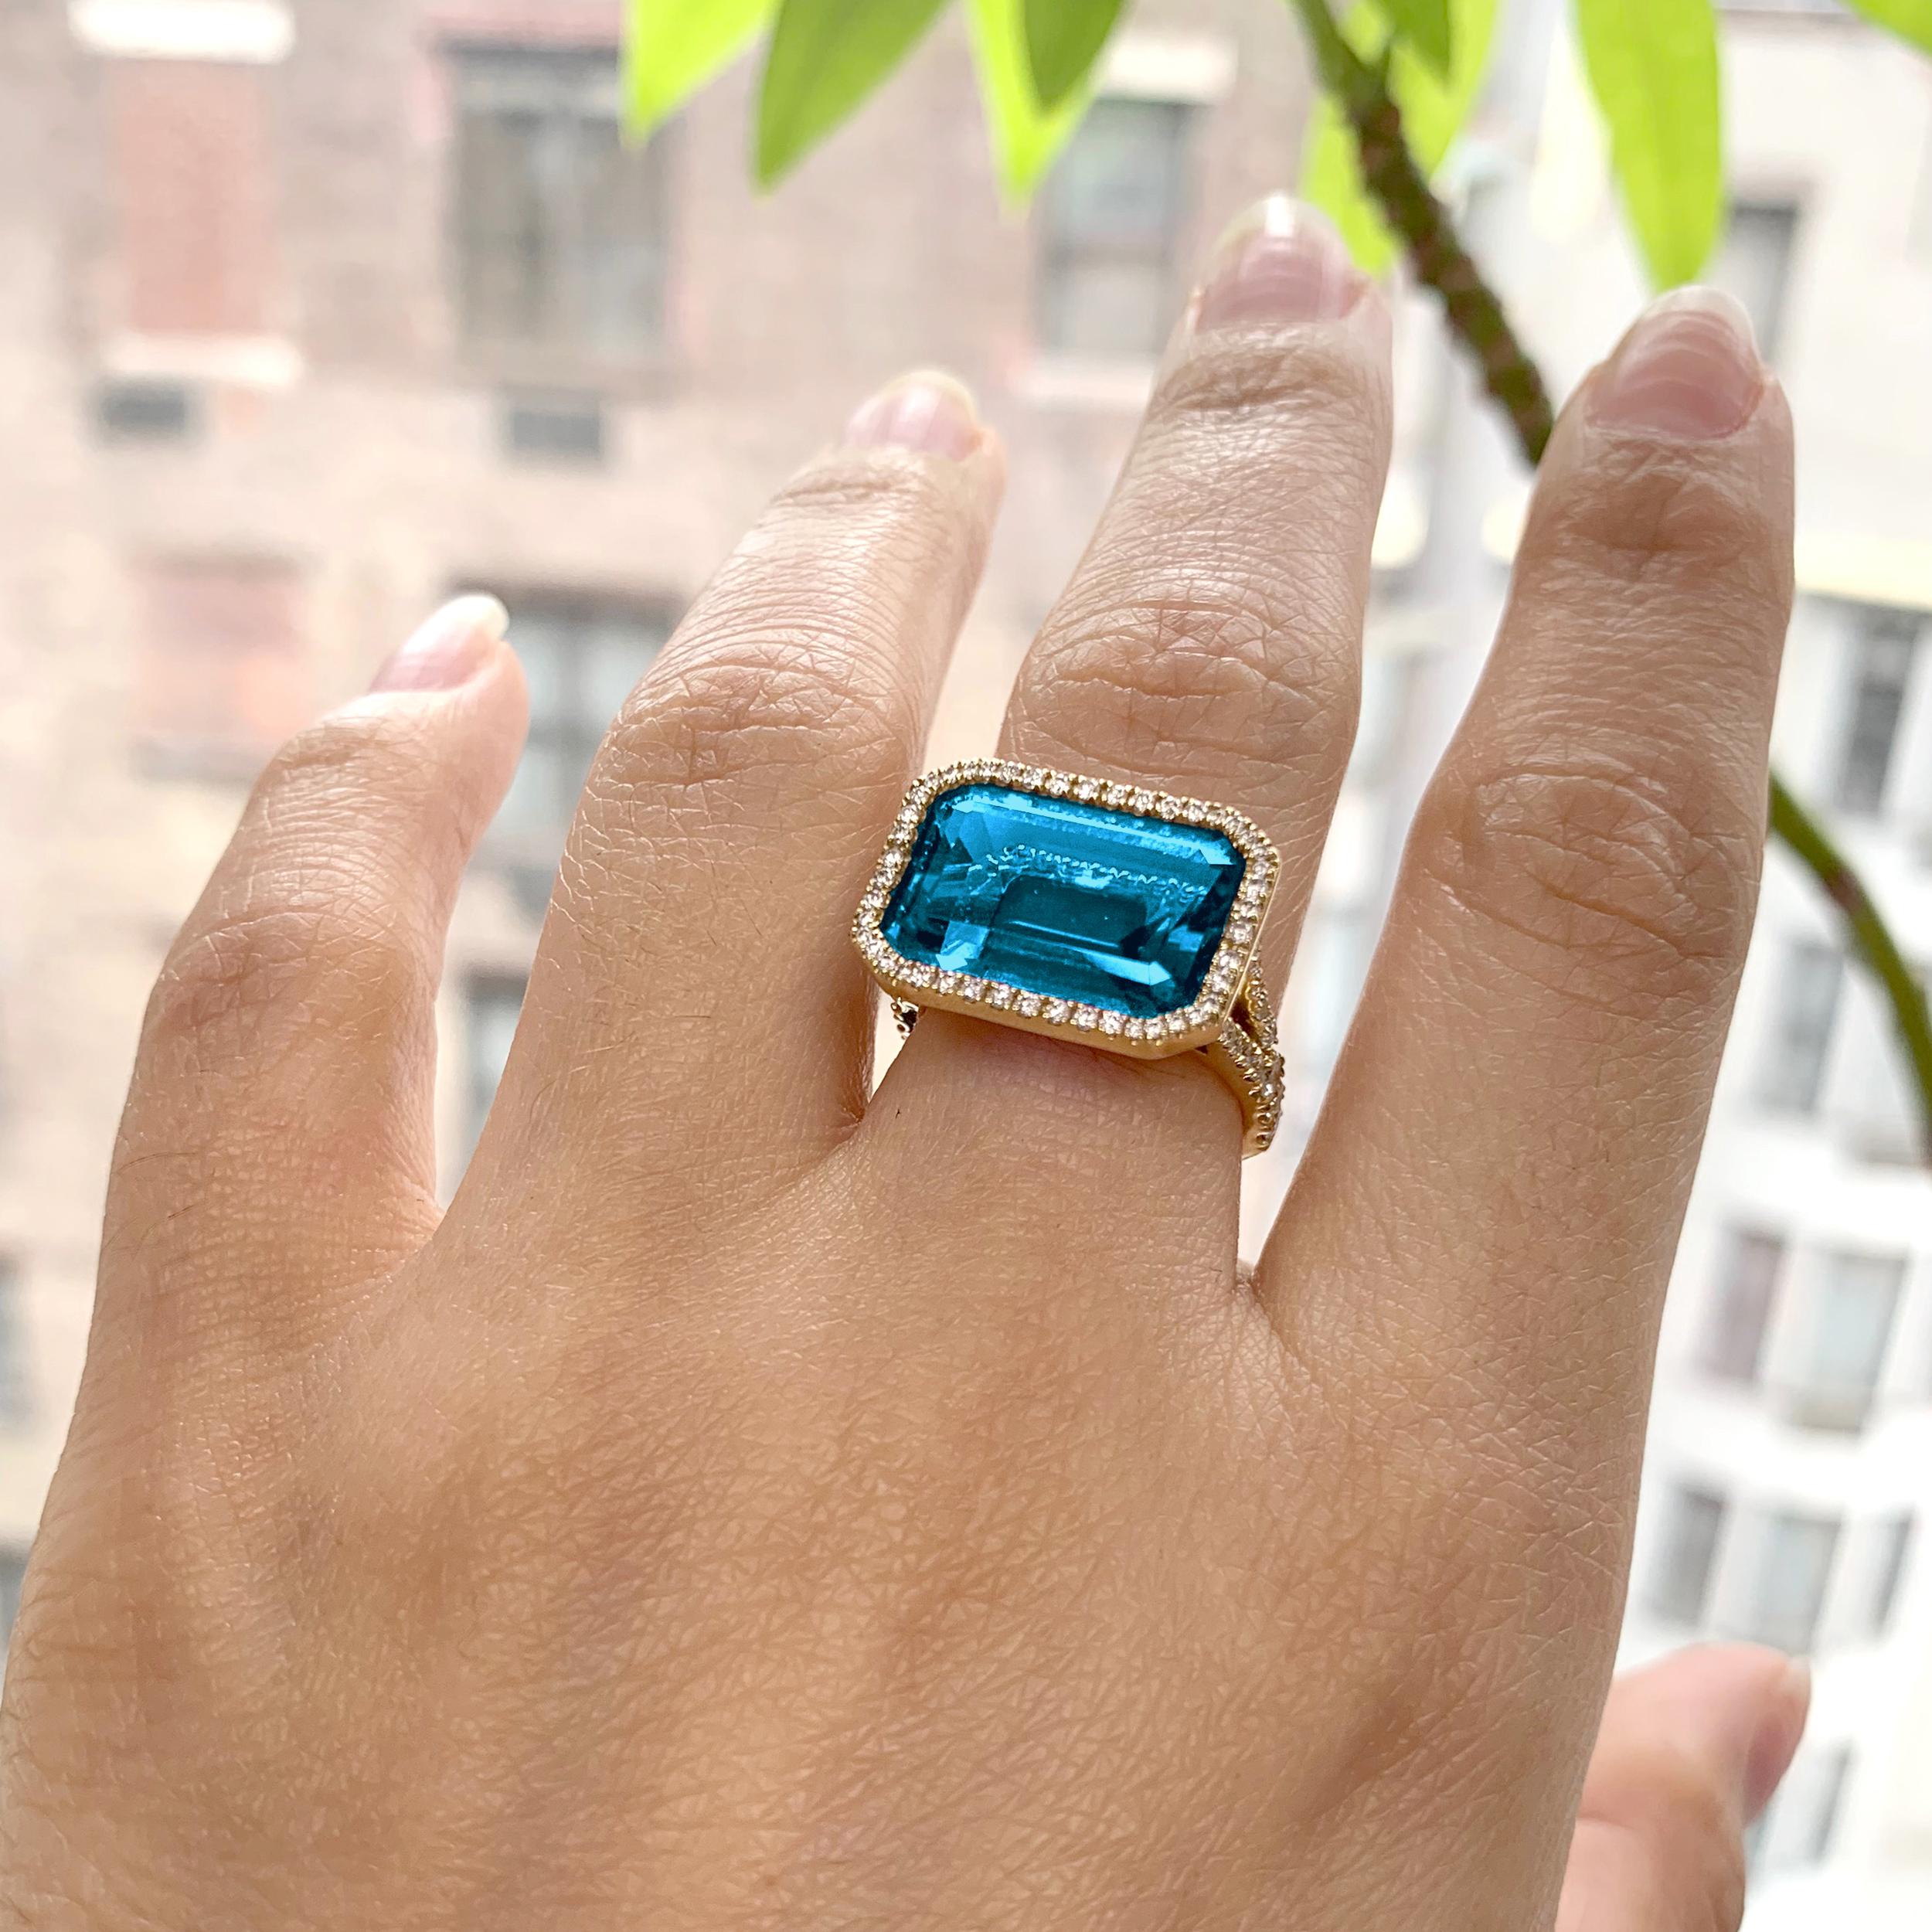 London Blue Topaz  East-West Emerald Cut Ring with Diamonds in 18K, from 'Gossip' Collection

Stone Size: 10 x 15 mm 

Diamonds: G-H / VS, Approx Wt: 0.73 Cts
